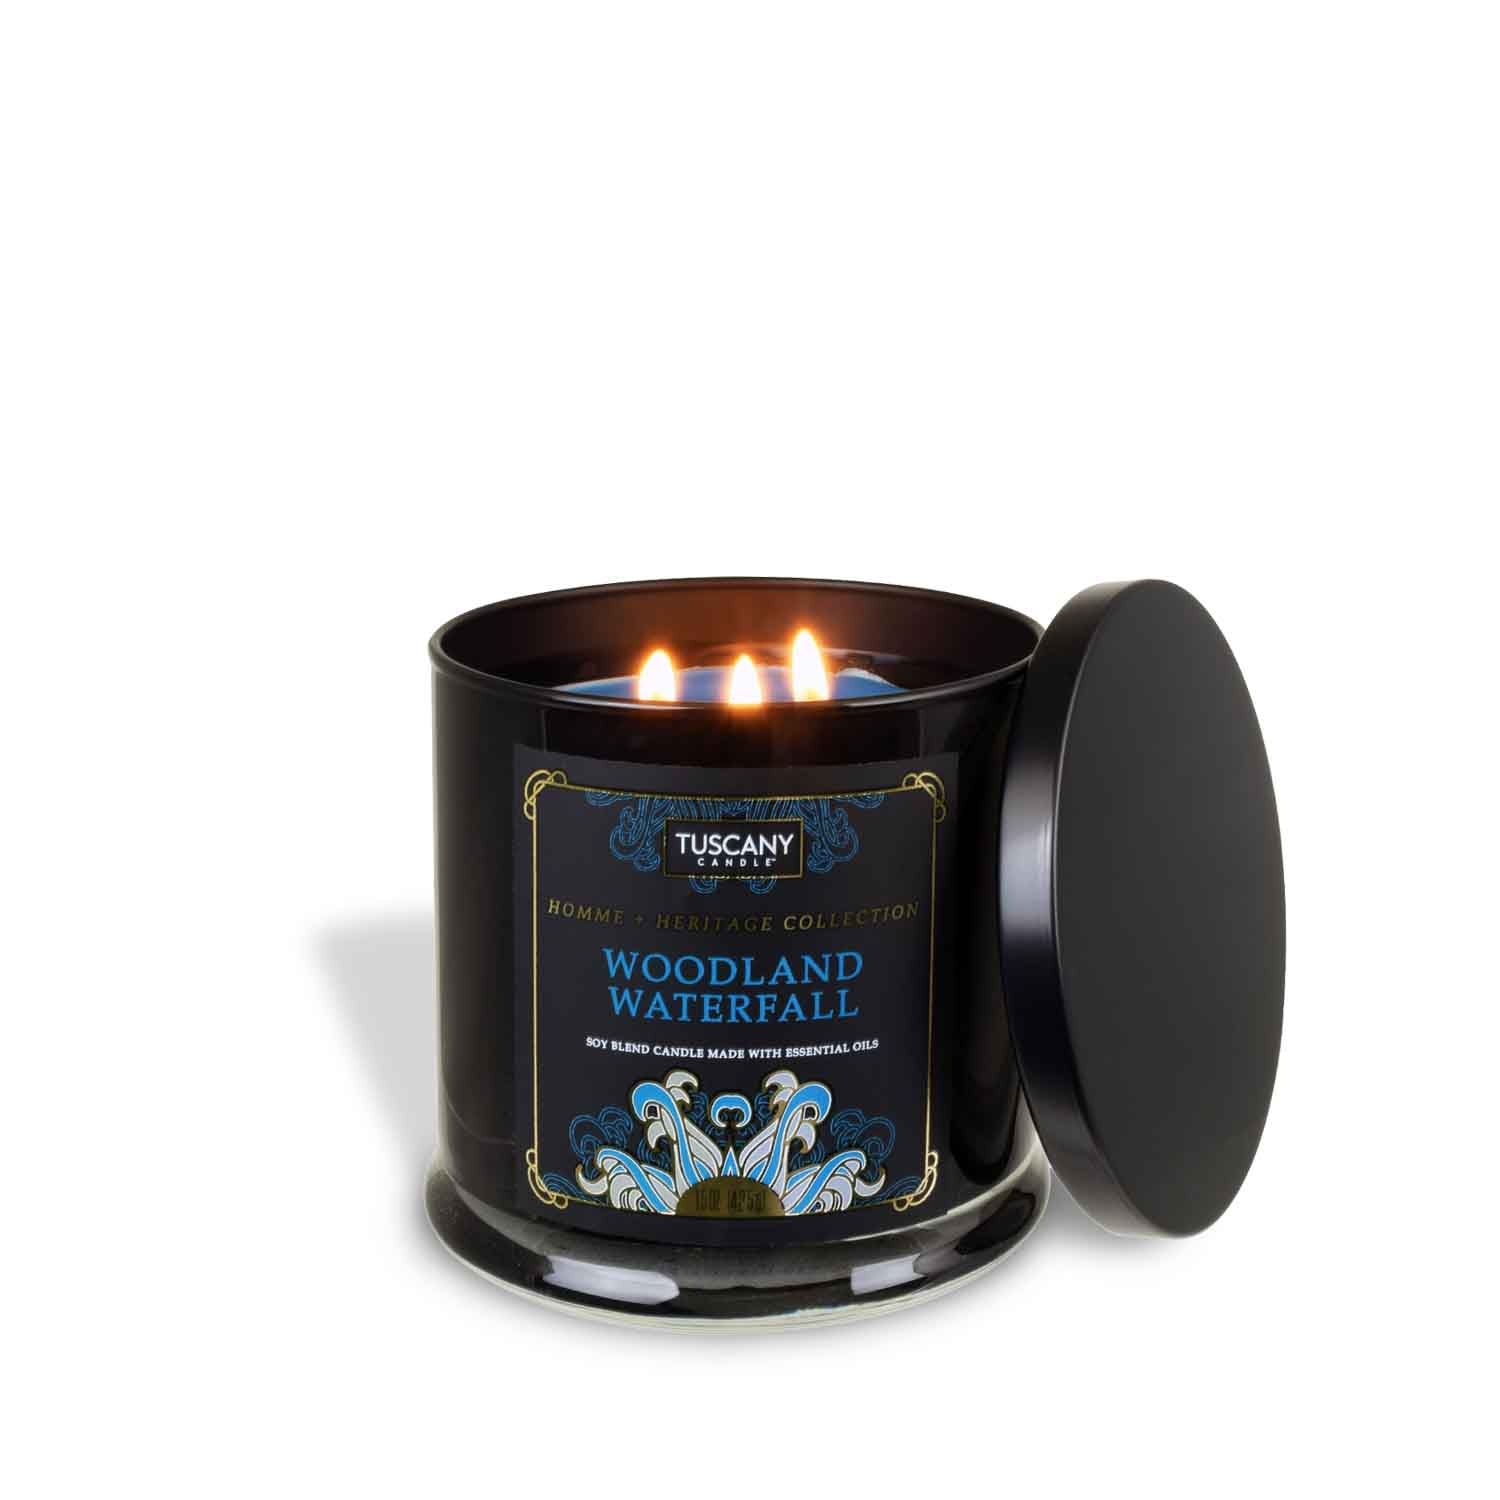 A Woodland Waterfall scented candle in a black tin with fresh ocean air - Homme + Heritage Collection by Tuscany Candle.